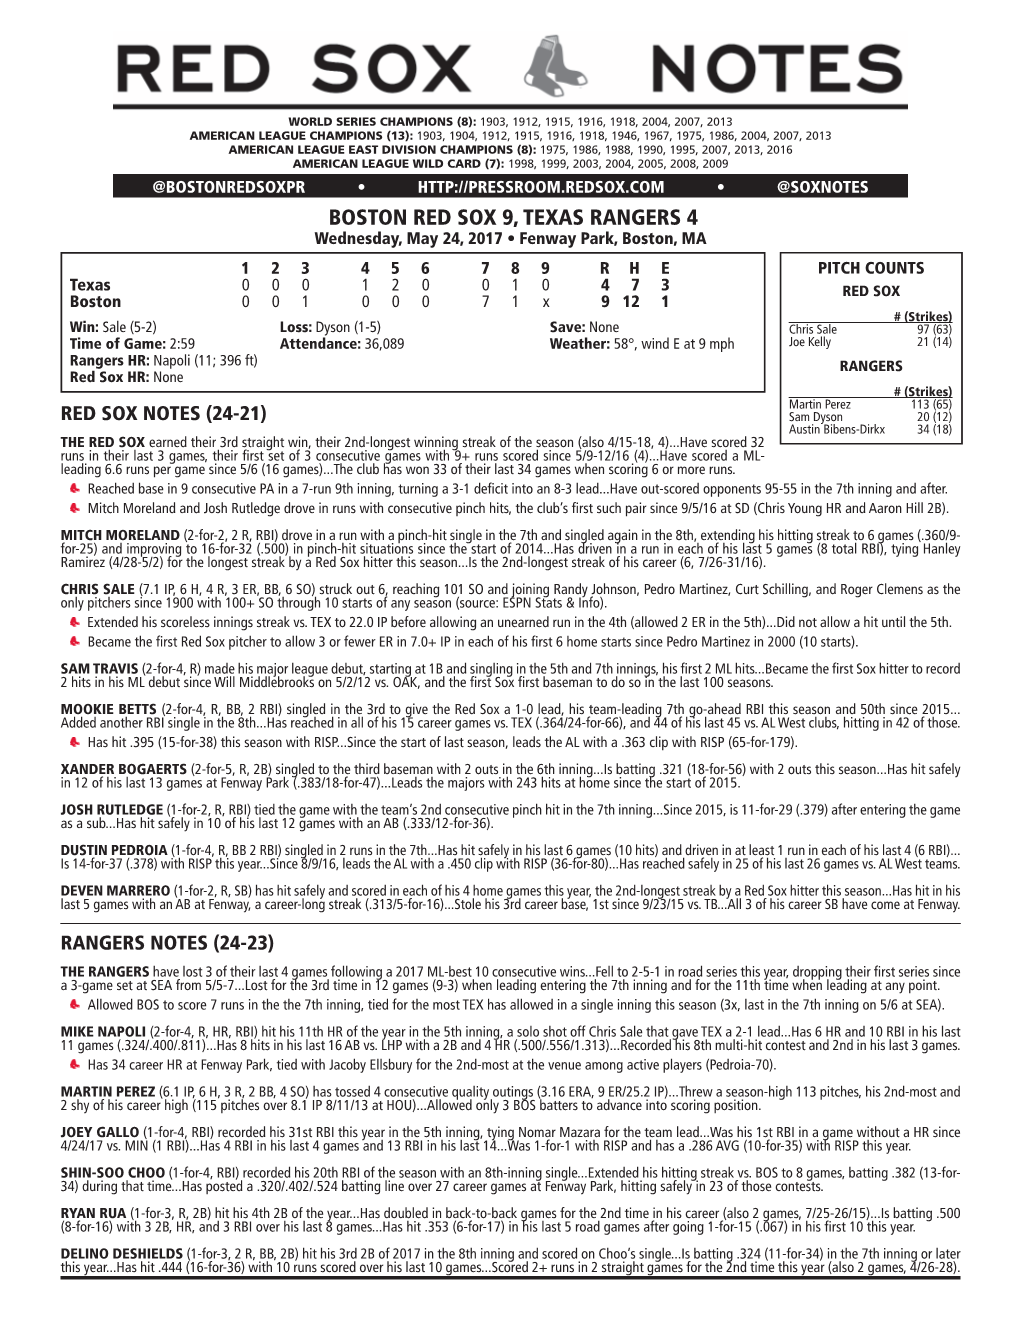 Post-Game Notes 524 Vs. TEX.Indd